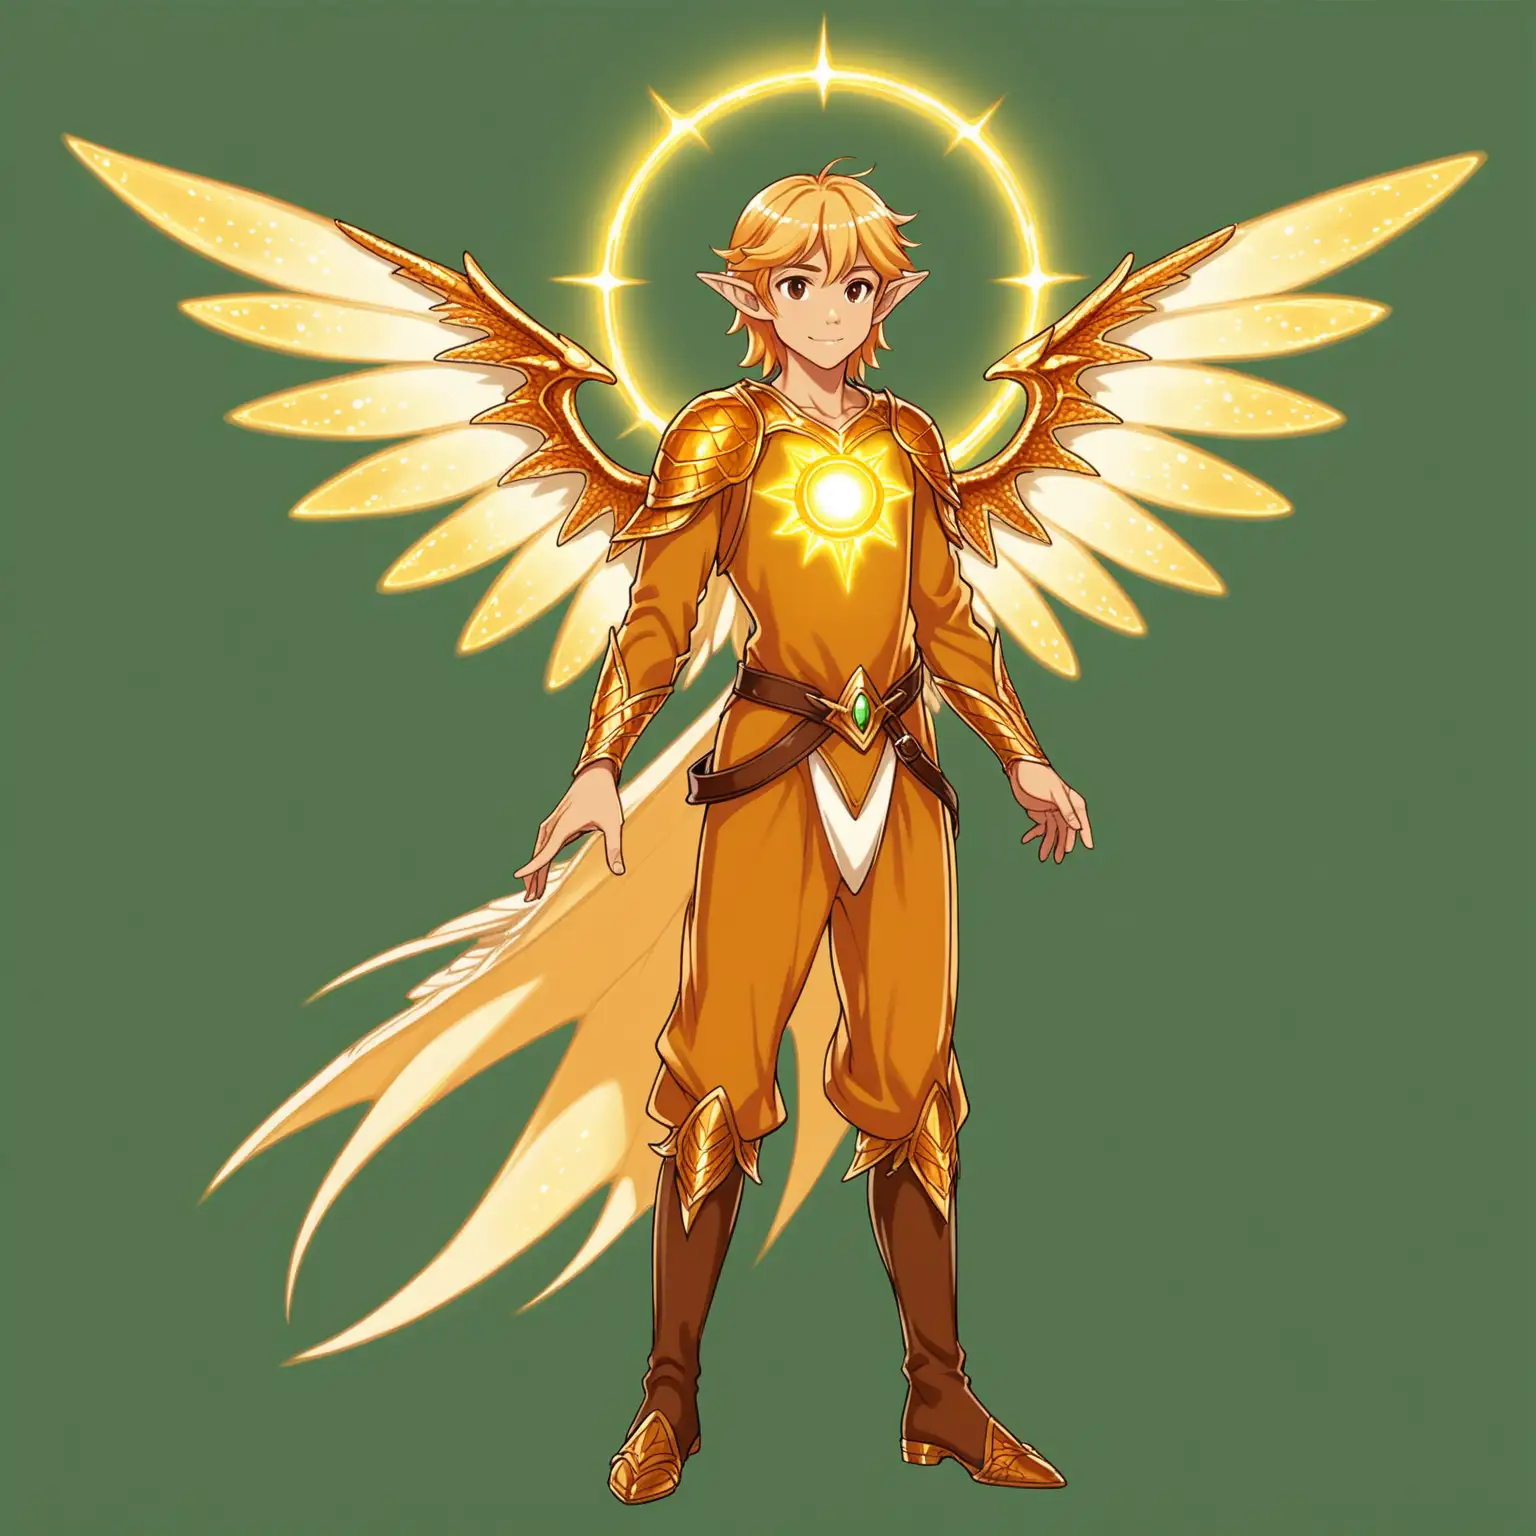 Young, tanned, male with long strawberry-blonde hair, a sun halo, and golden glowing draconic wings. Elven-style clothing. Ghibli style. No background